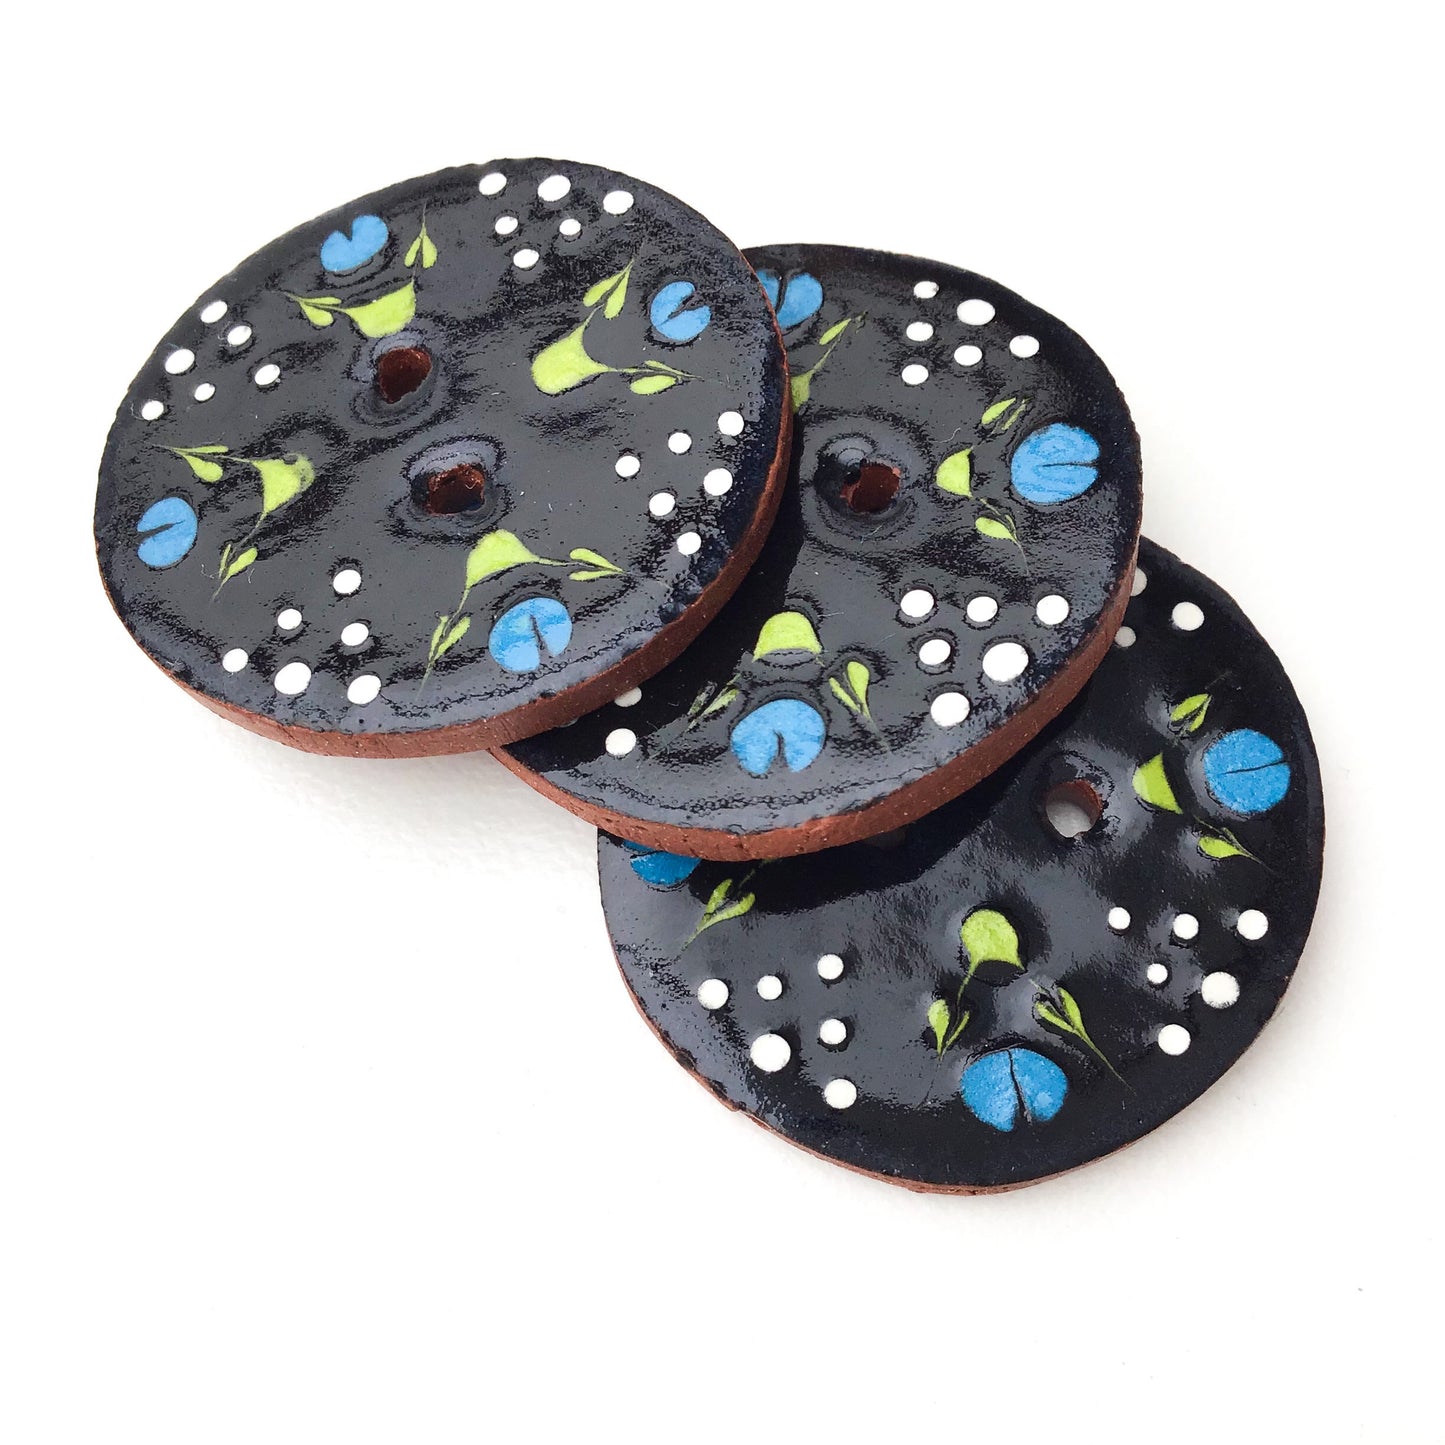 Black Ceramic Button with Blue Flowers - Decorative Clay Button - 1 1/16"